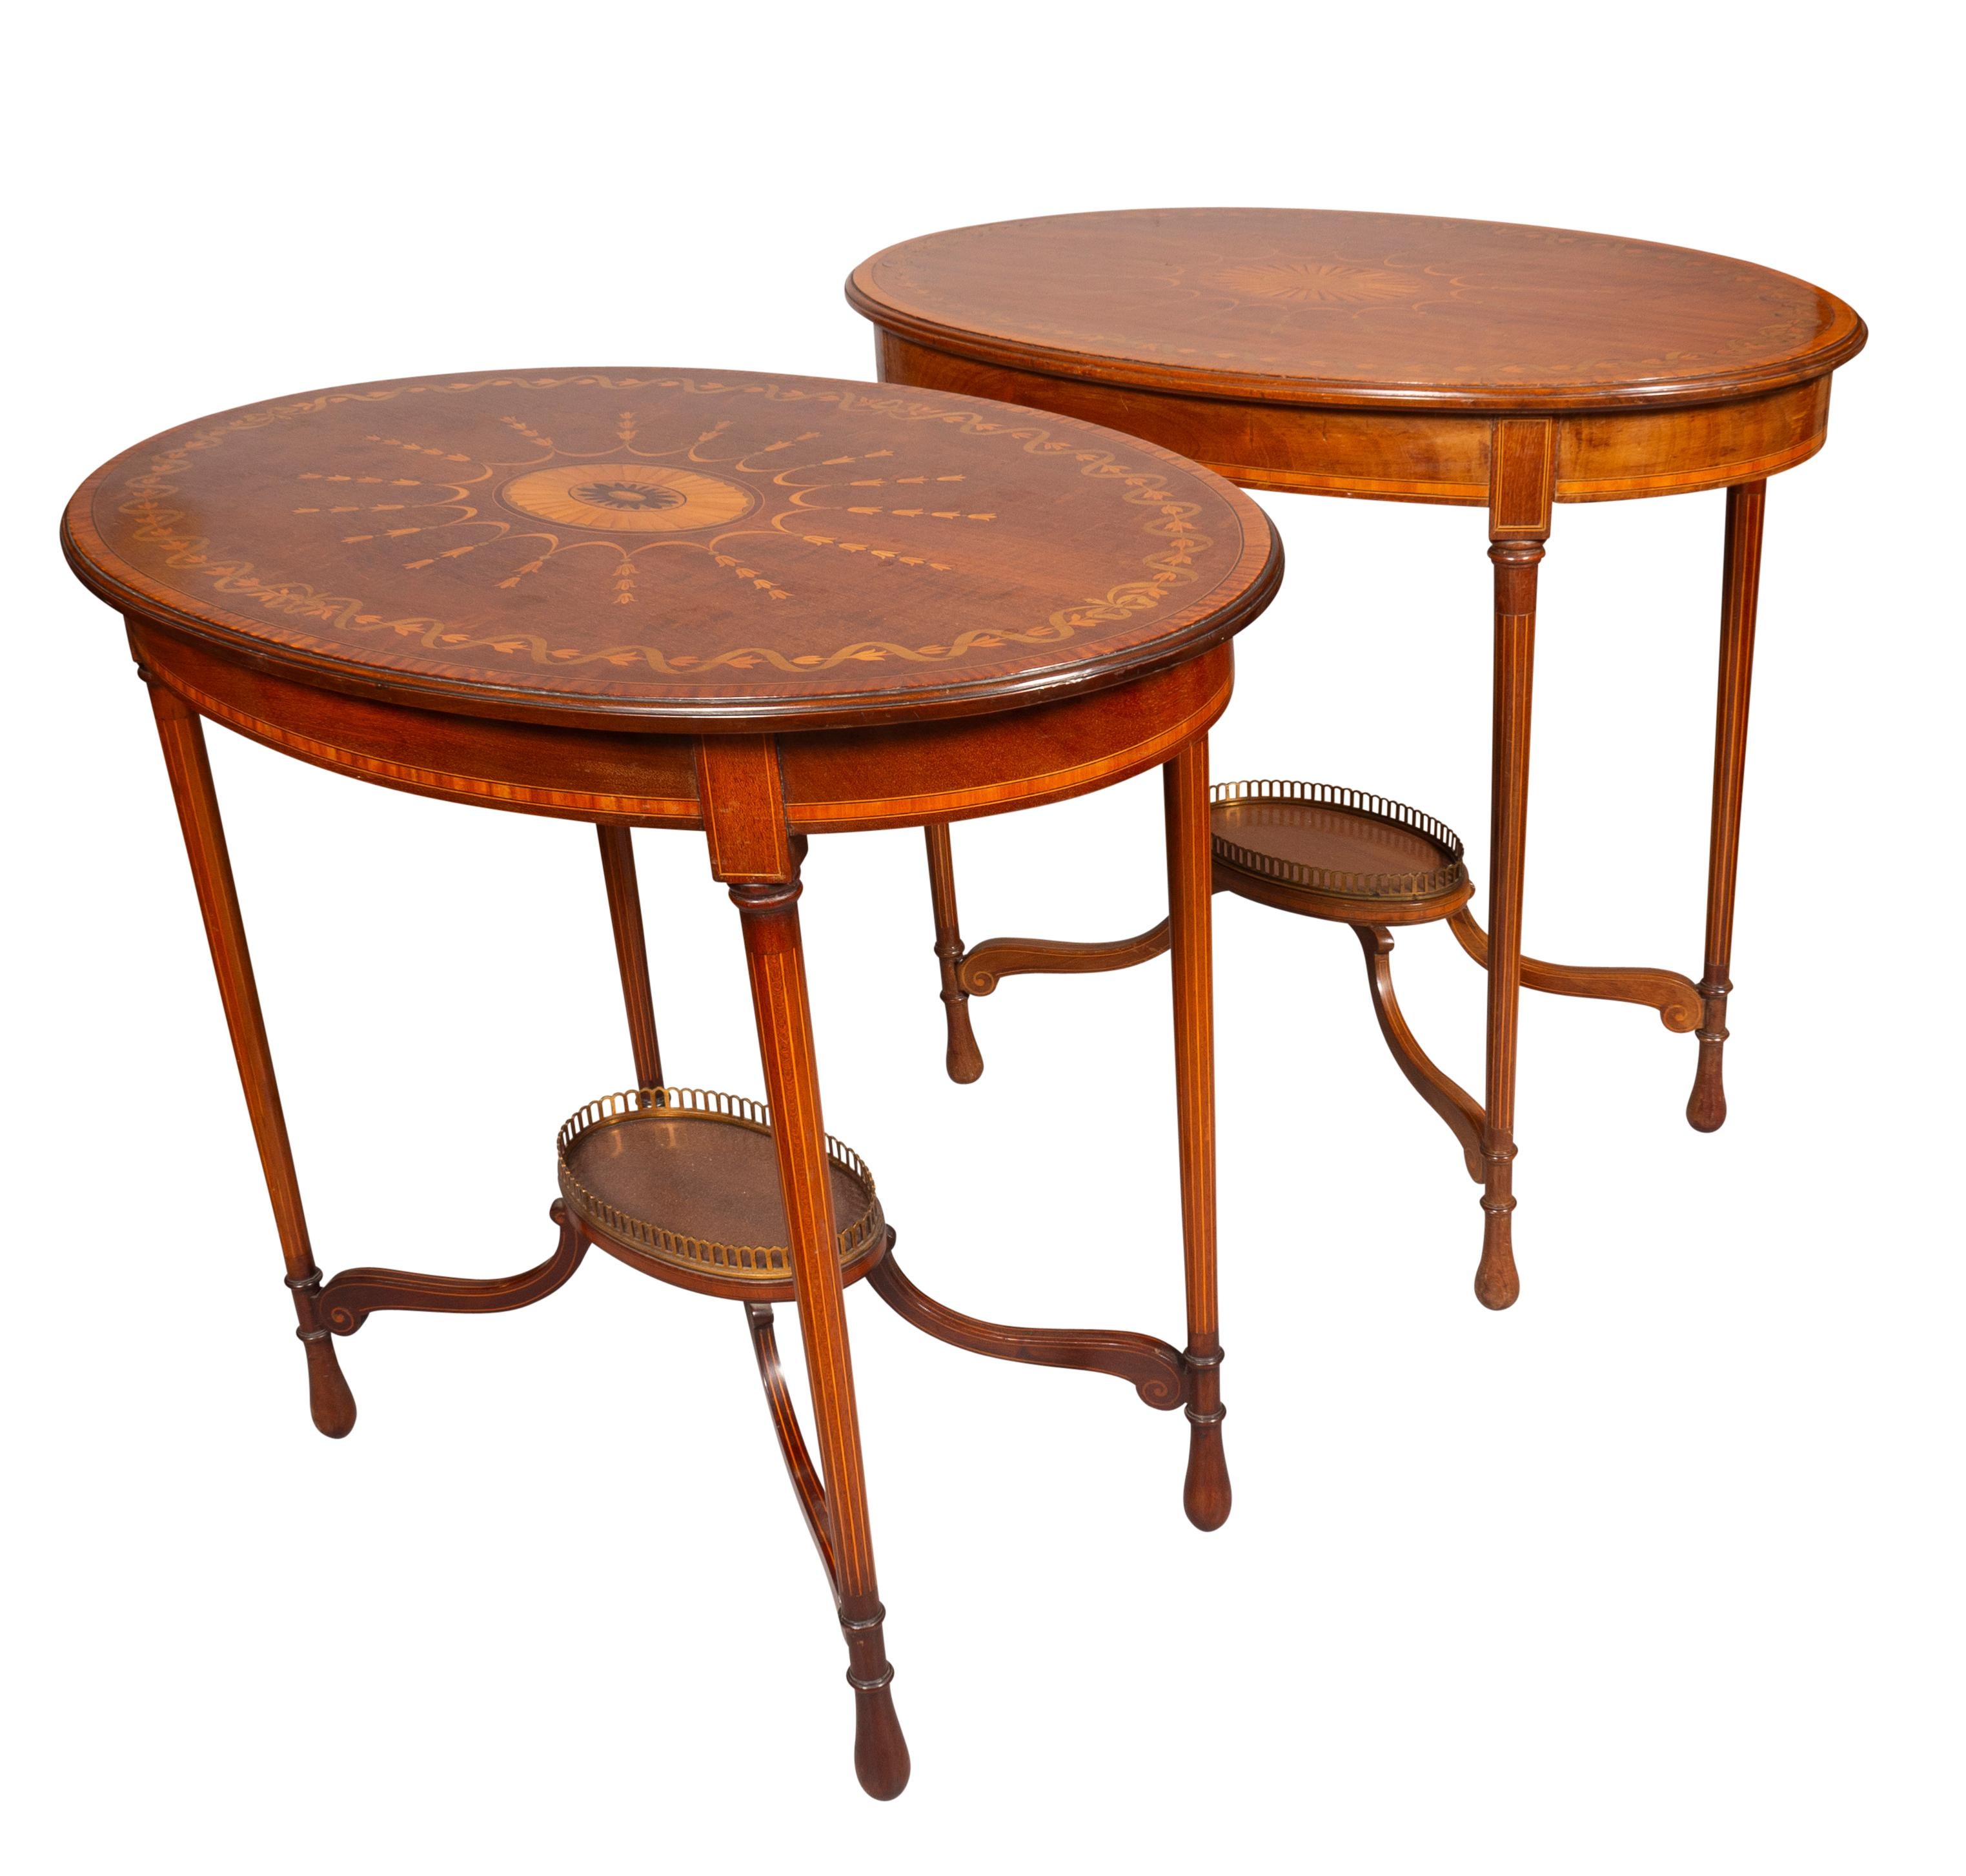 Each with oval tops with central paterae inlay with outer borders of different woods. Conforming apron raised on circular string inlaid tapered legs joined by a stretcher with central oval shelf with brass gallery.